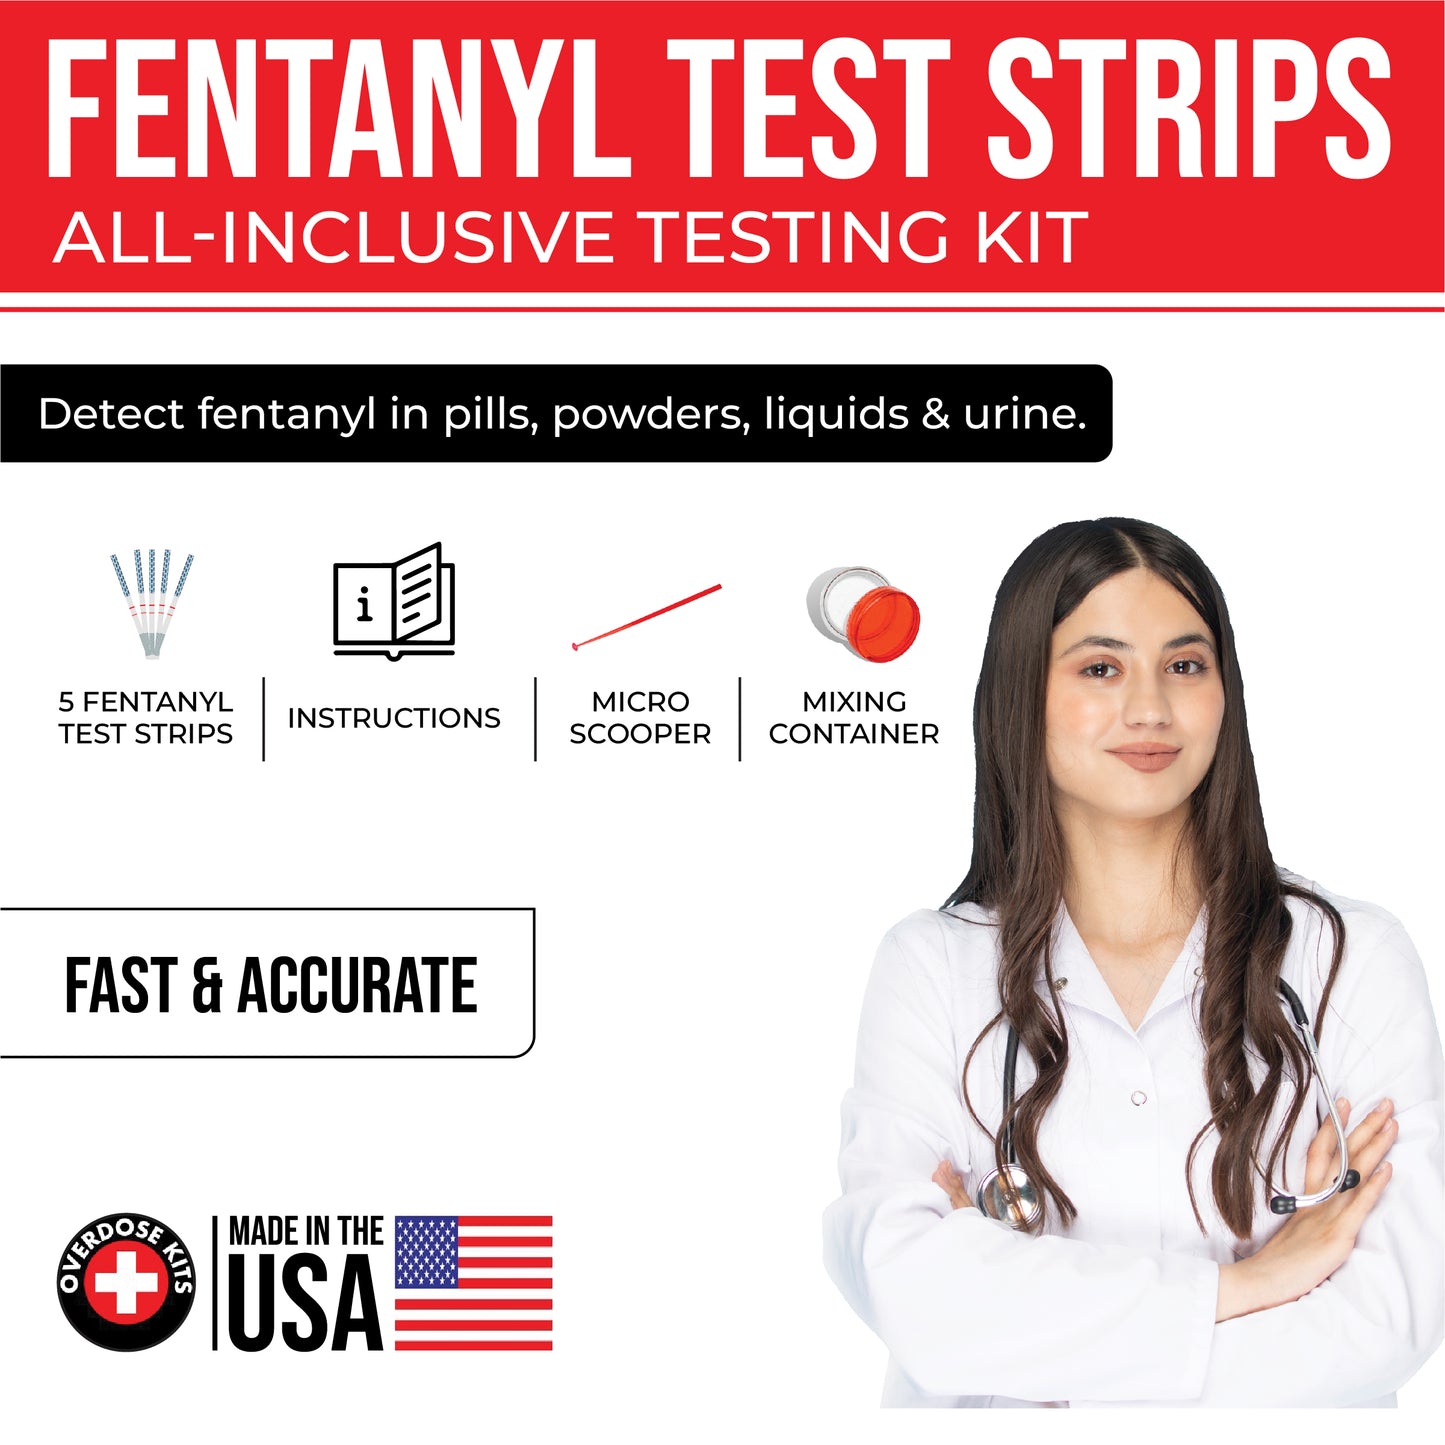 Fentanyl Test Strip Kit (5 Pack) - Includes 5 Fentanyl Test Strips, Mixing Container, 10mg Spoon and Instructions